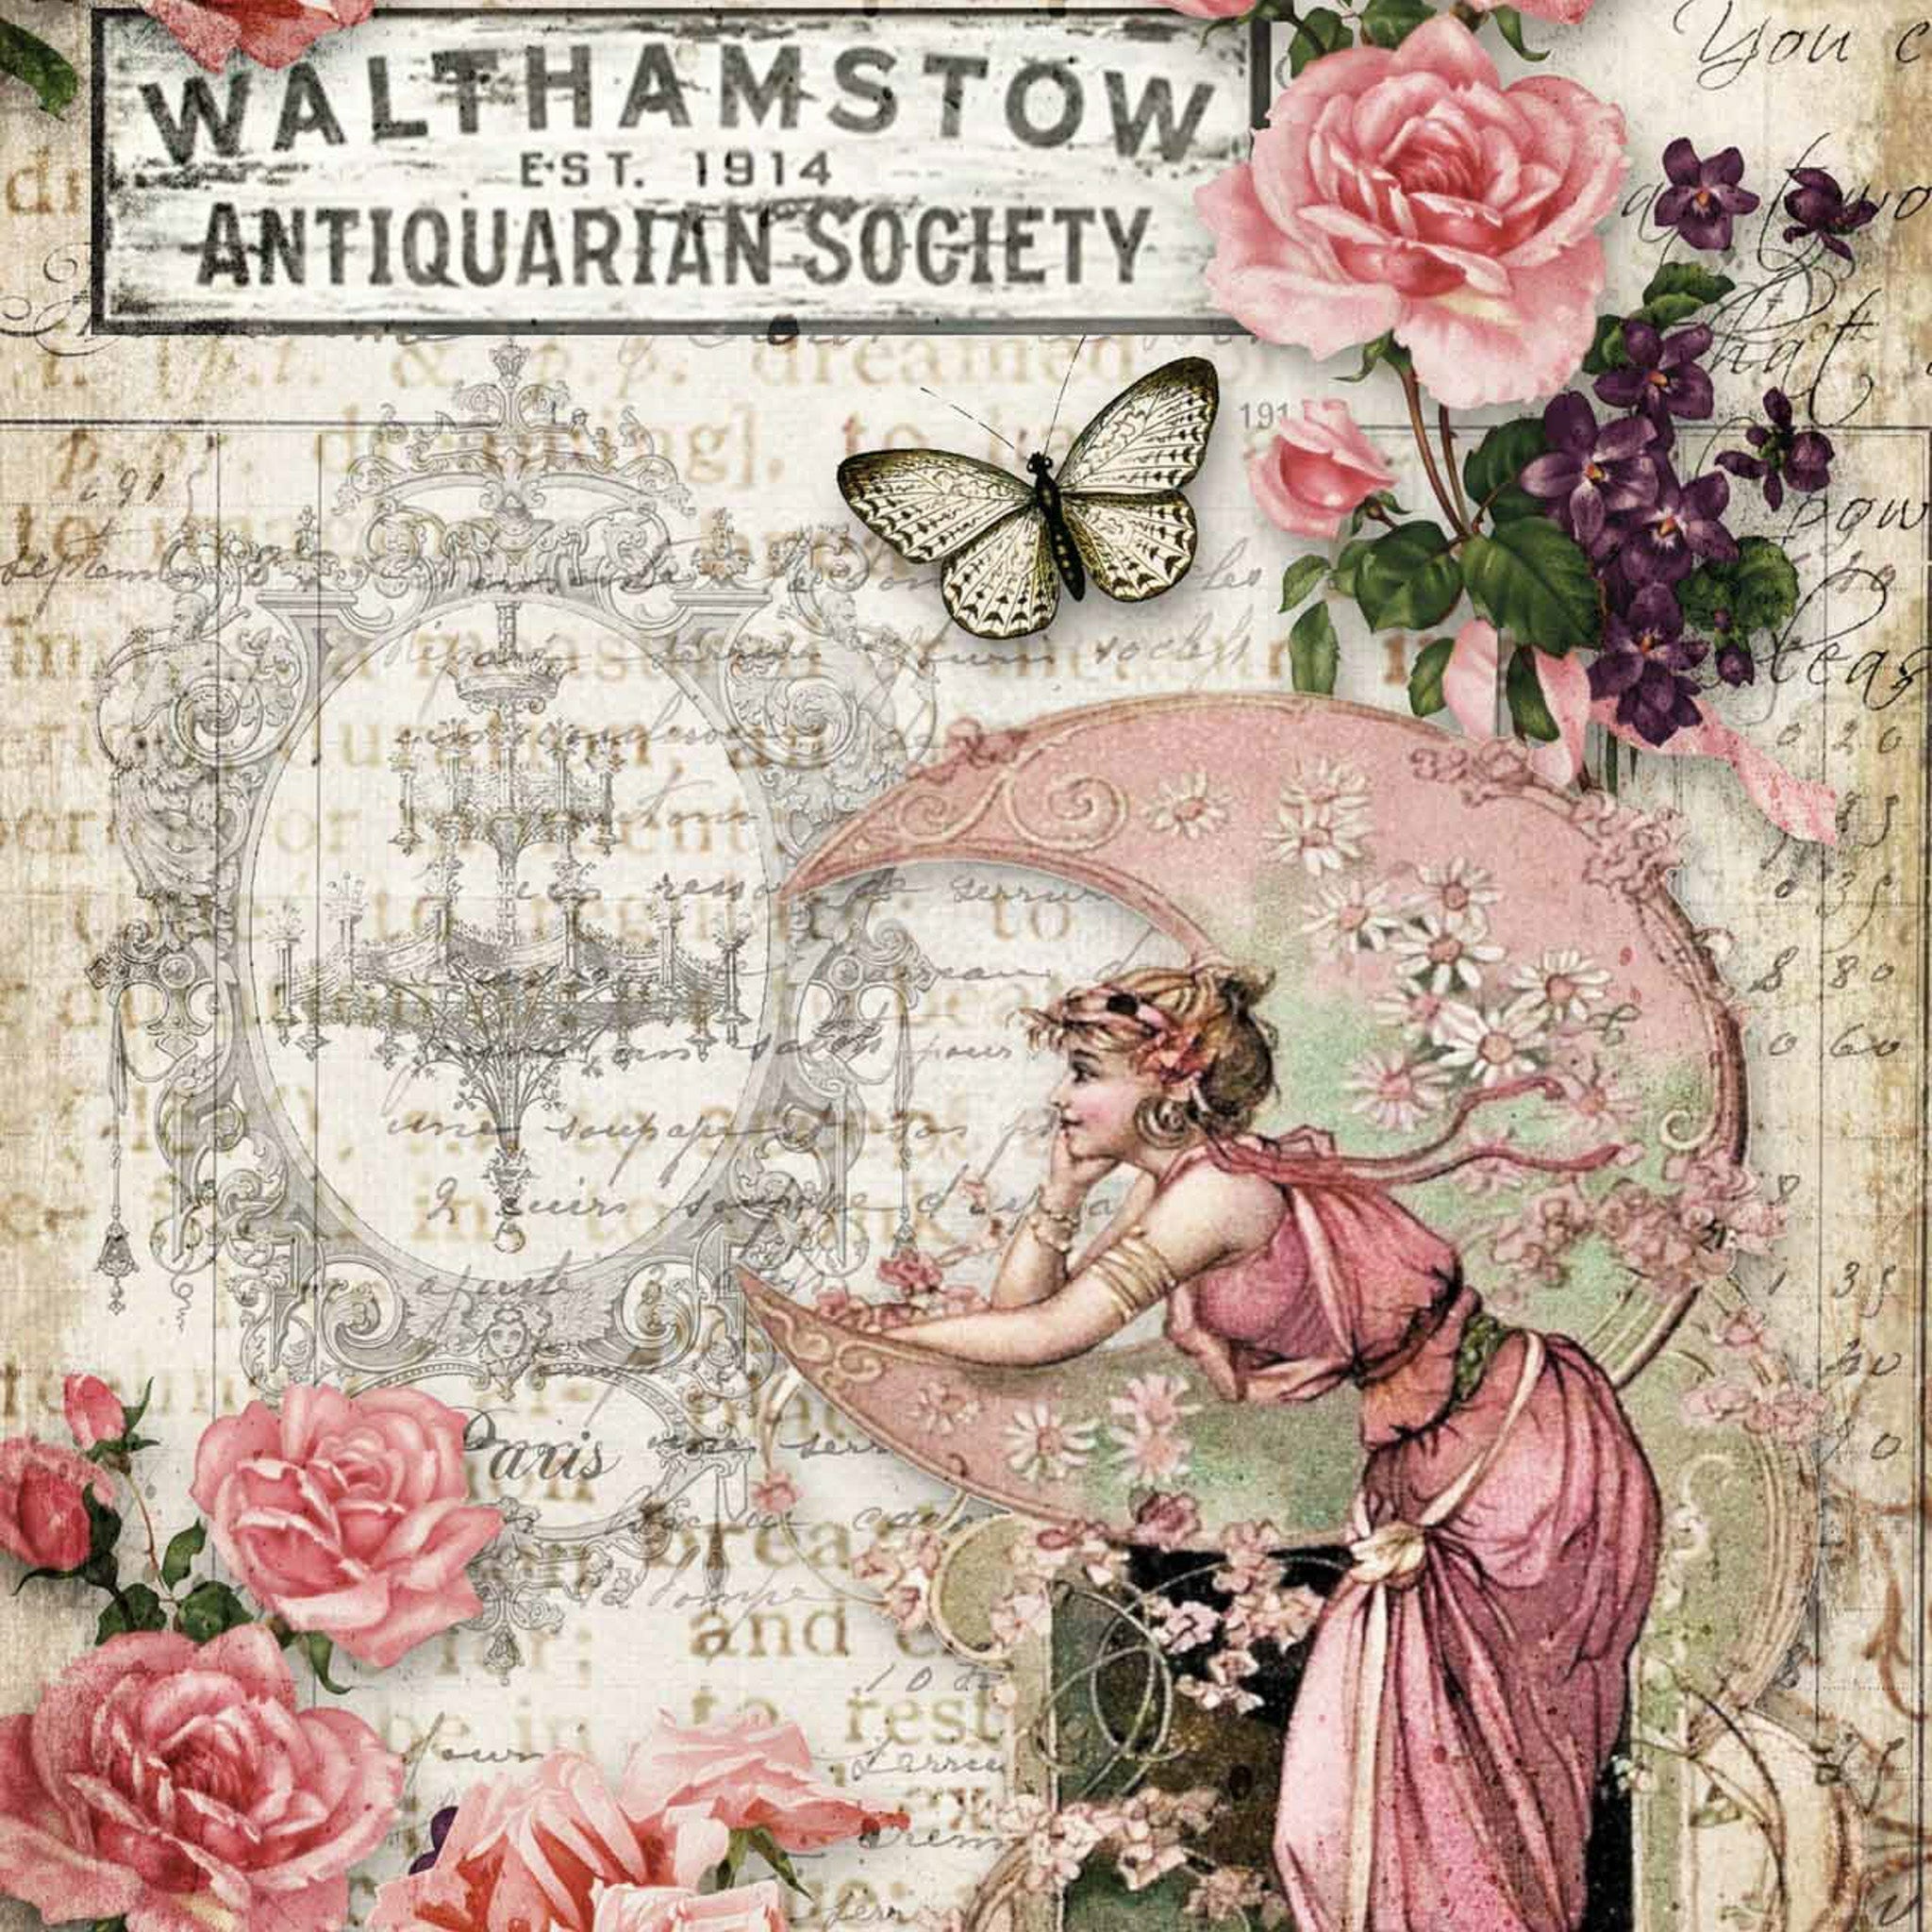 Close-up of an A1 rice paper design that features vintage parchment with writing, large pink roses, a butterfly, vintage signs, and a woman in a pink dress resting on a pale pink crescent moon.